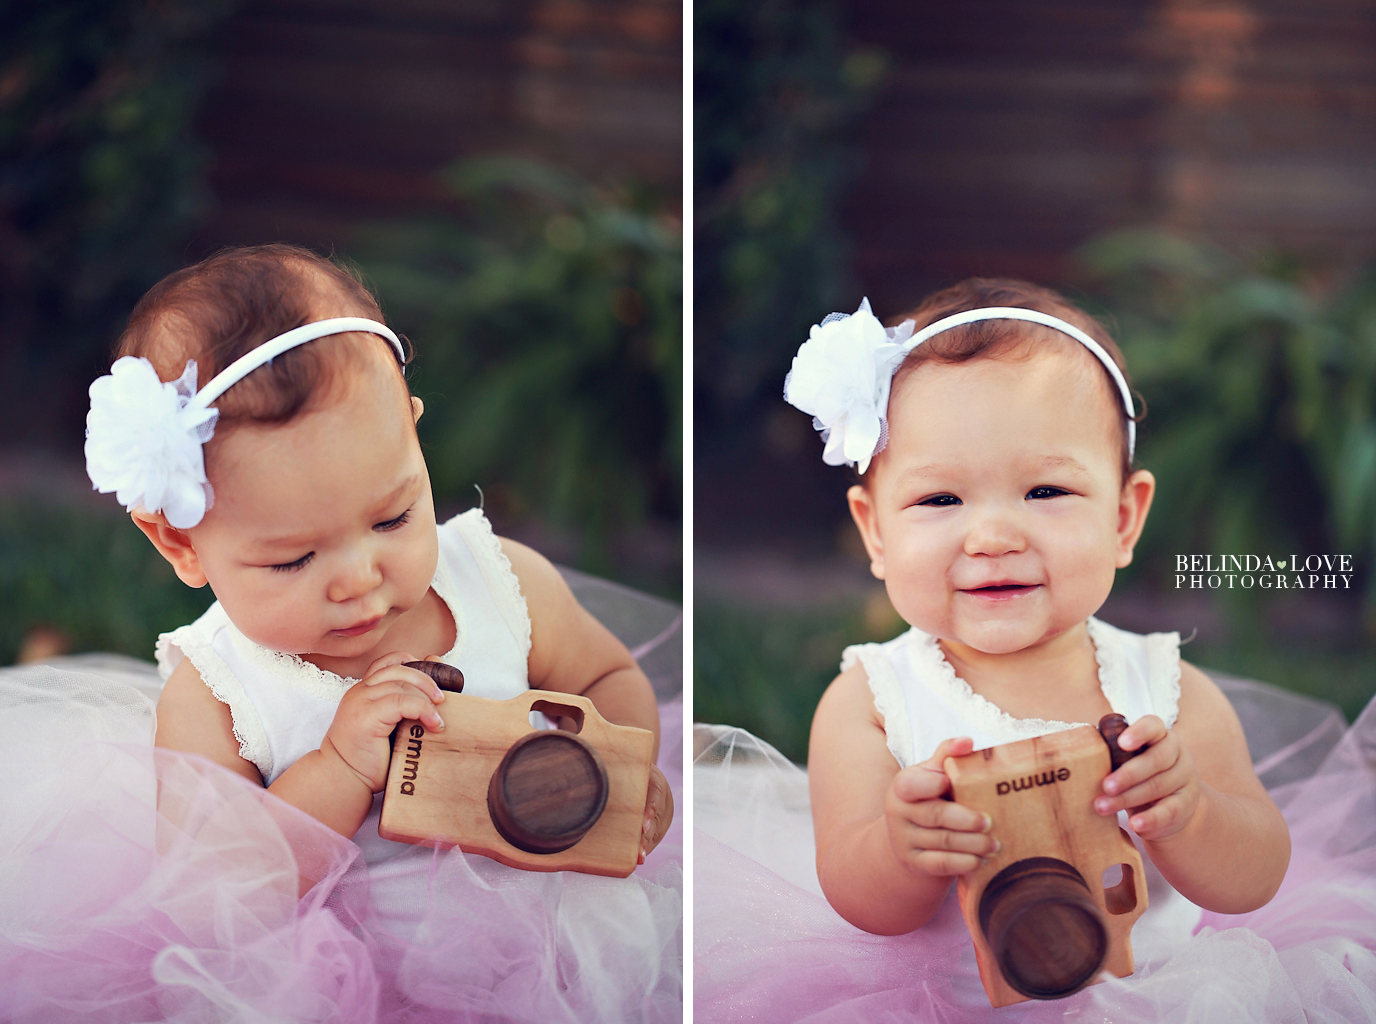 Belinda Love Photography Blog: Letter to my daughter: Nine months later